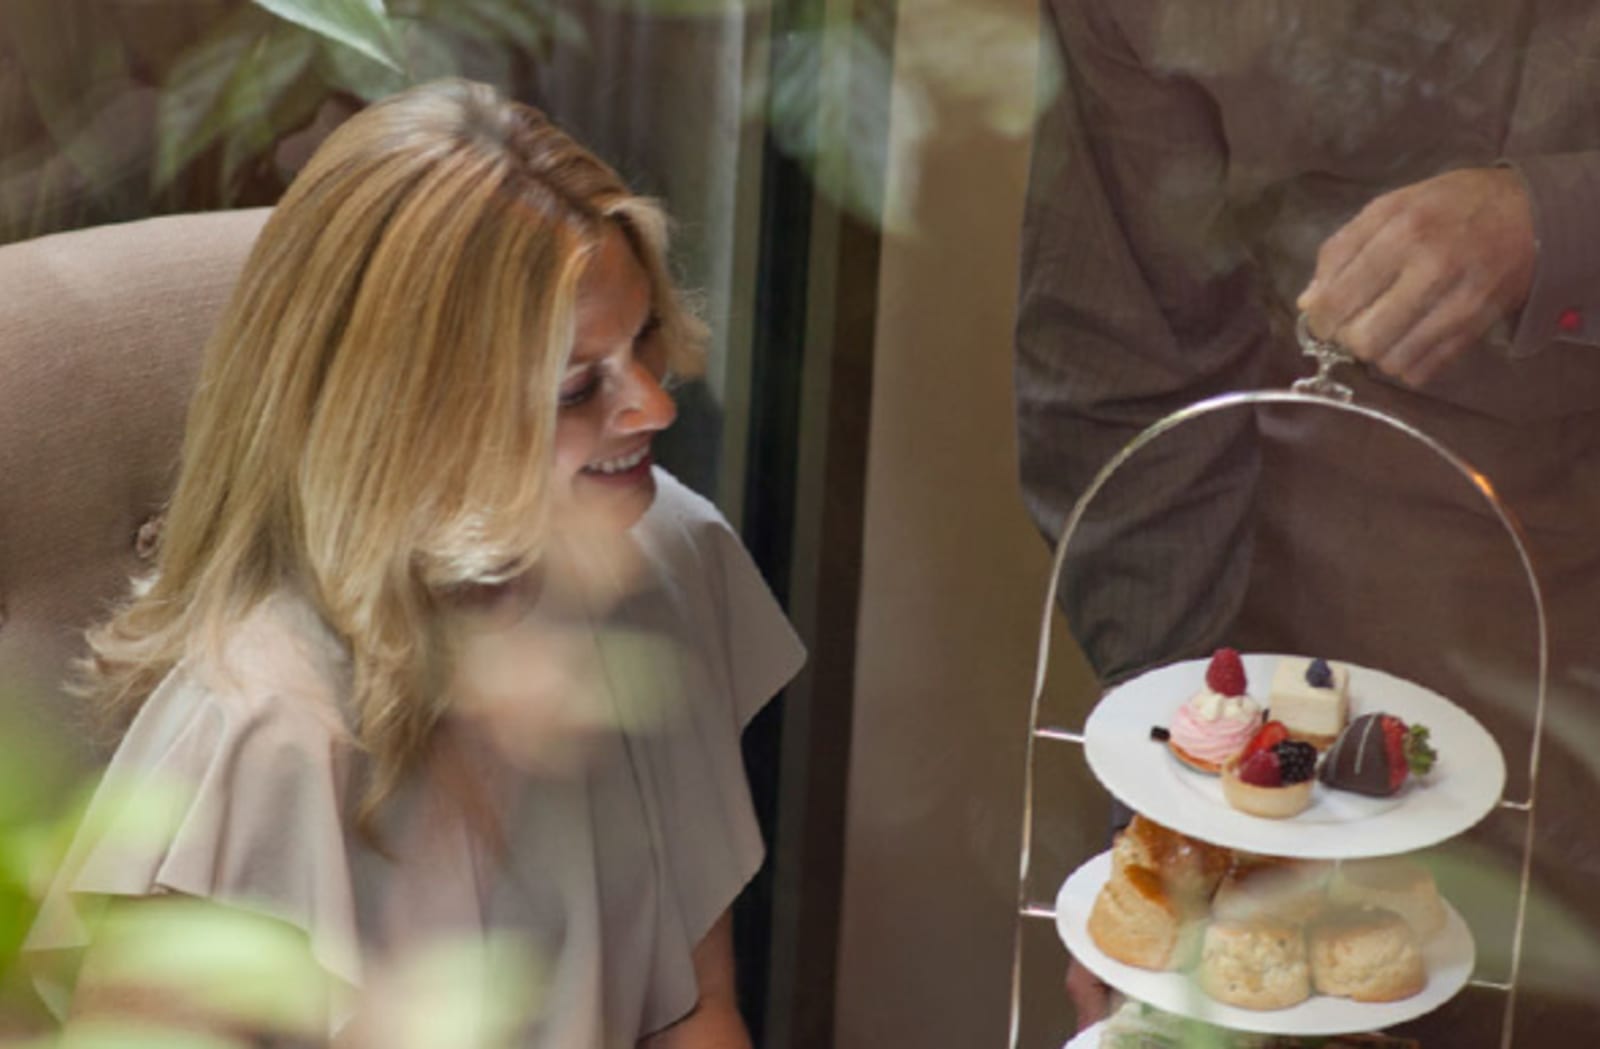 Blonde woman smiling at a high-tea tray